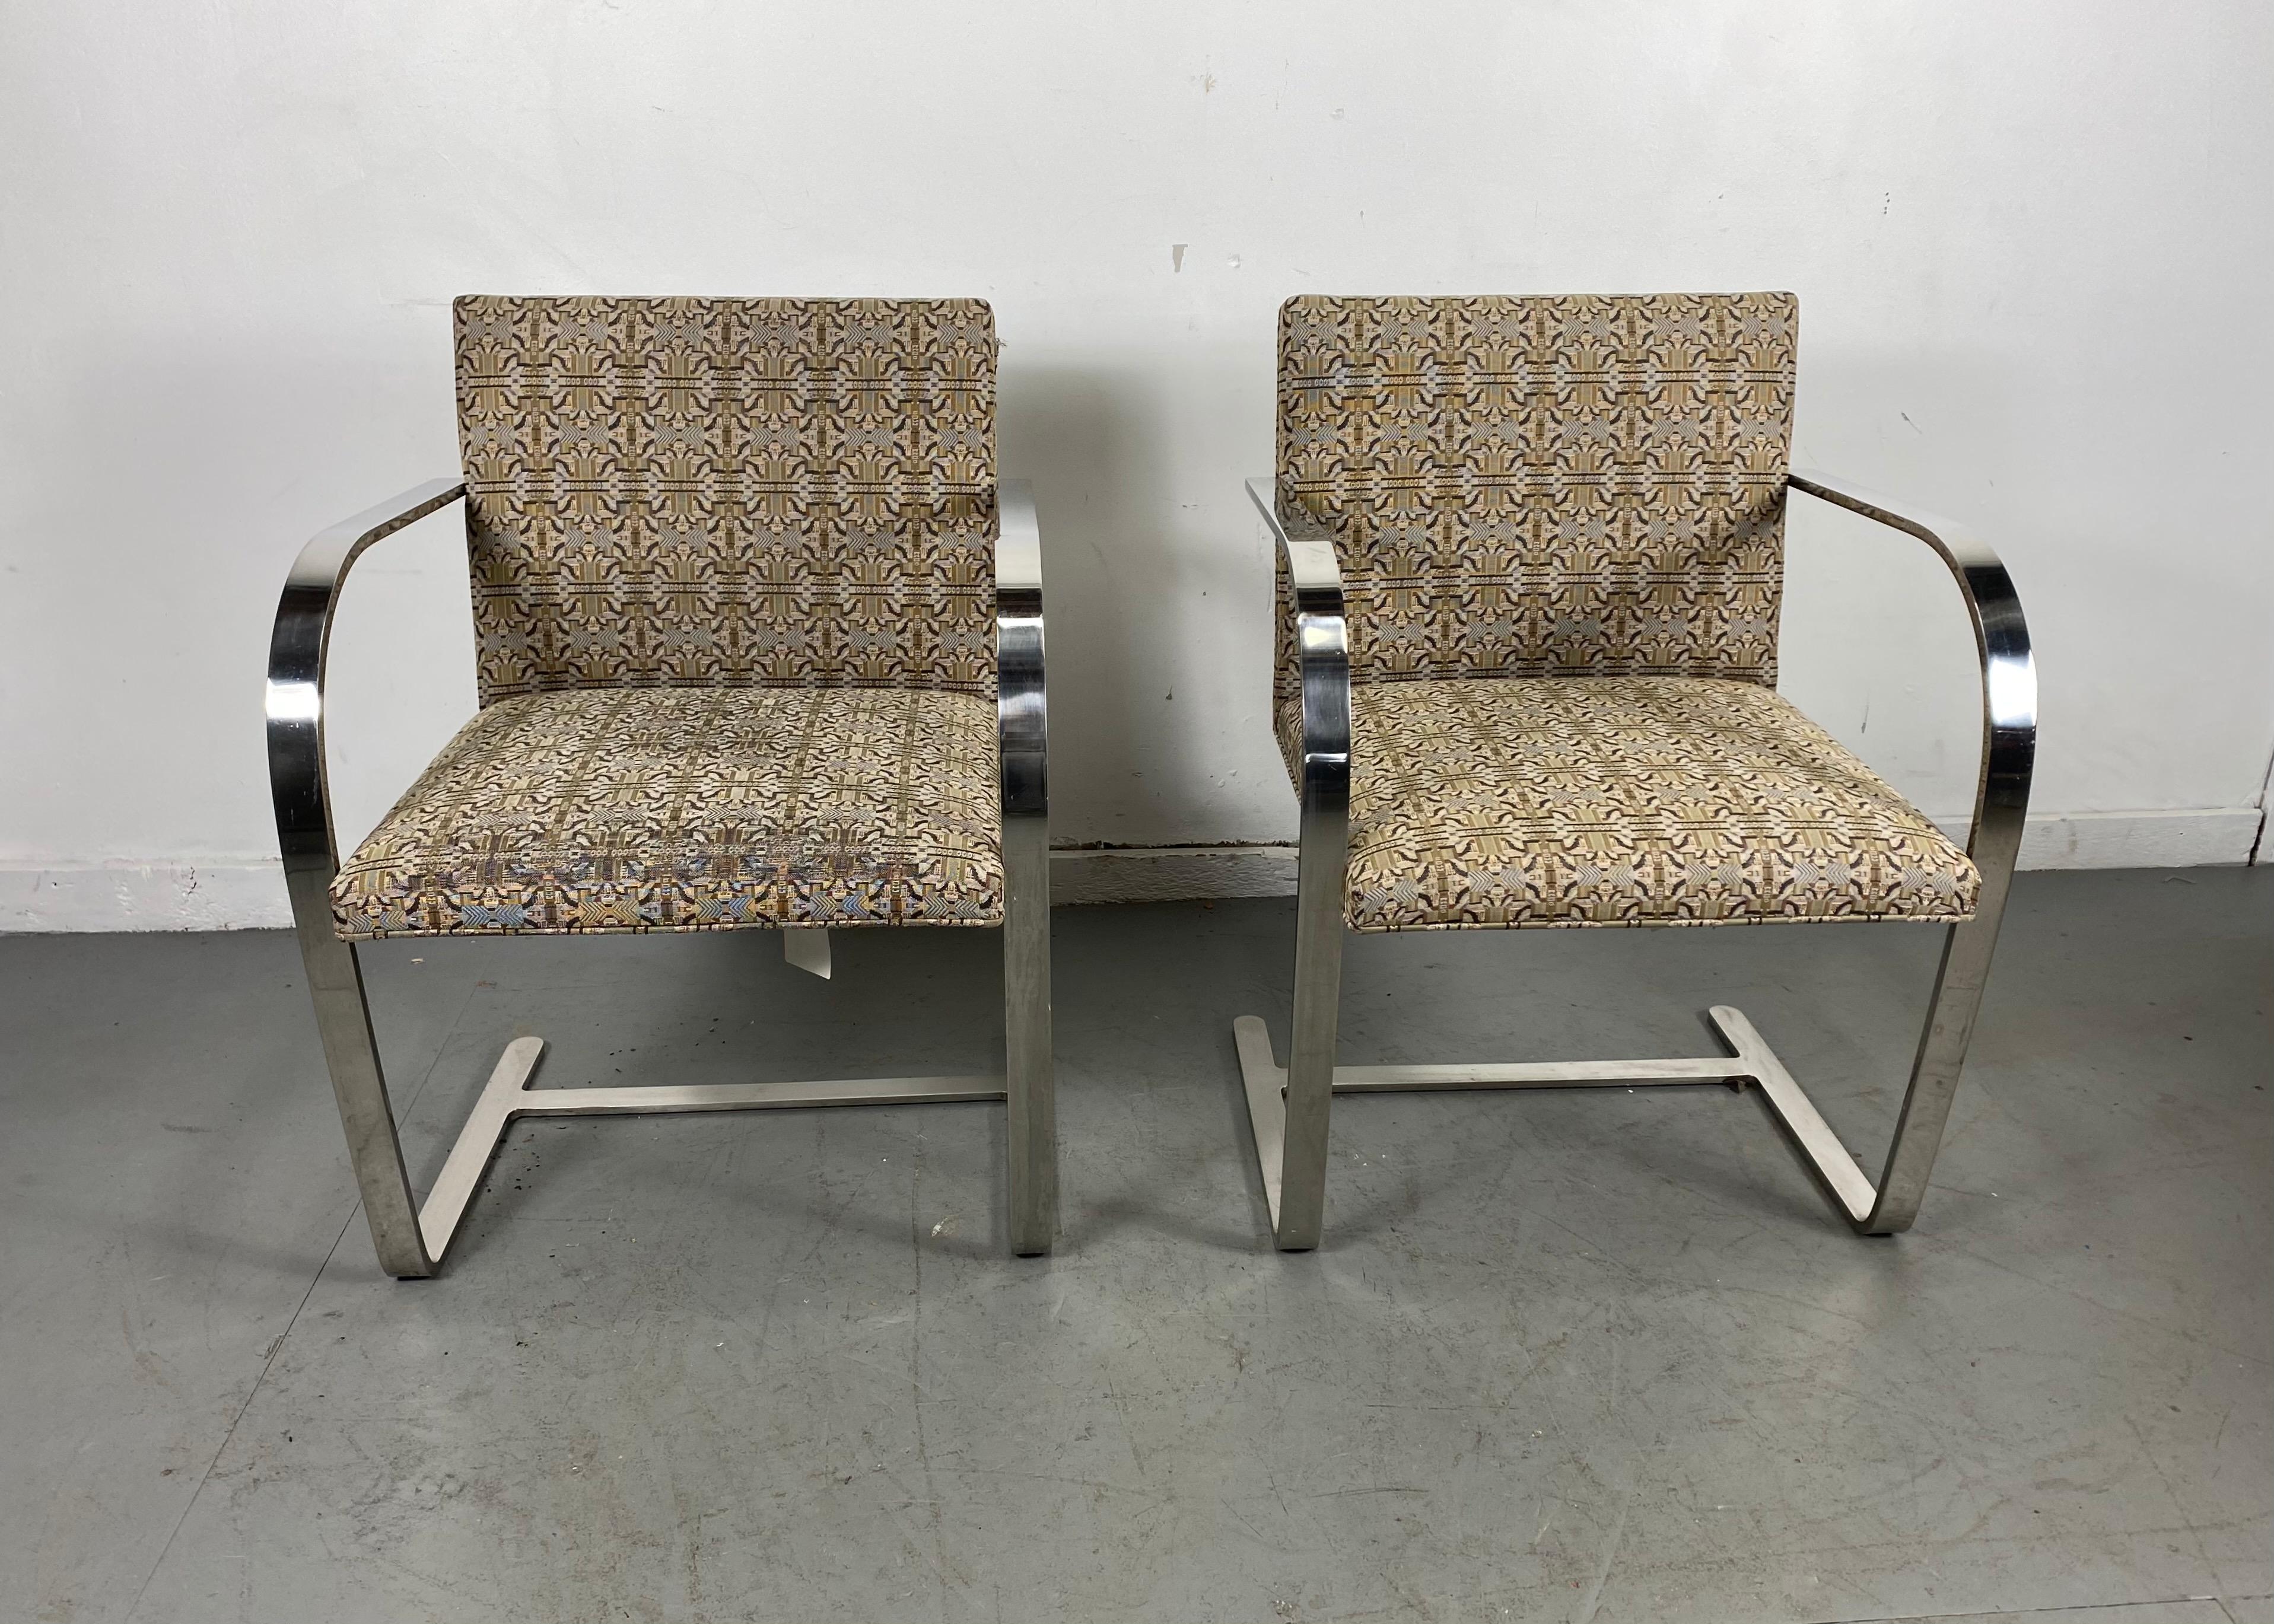 Matching pair of Brno chairs designed by Mies Van Der Rohe for Knoll, flat bar steel frames, stunning custom order fabric, one chair minor wear, retain original Knoll labels.